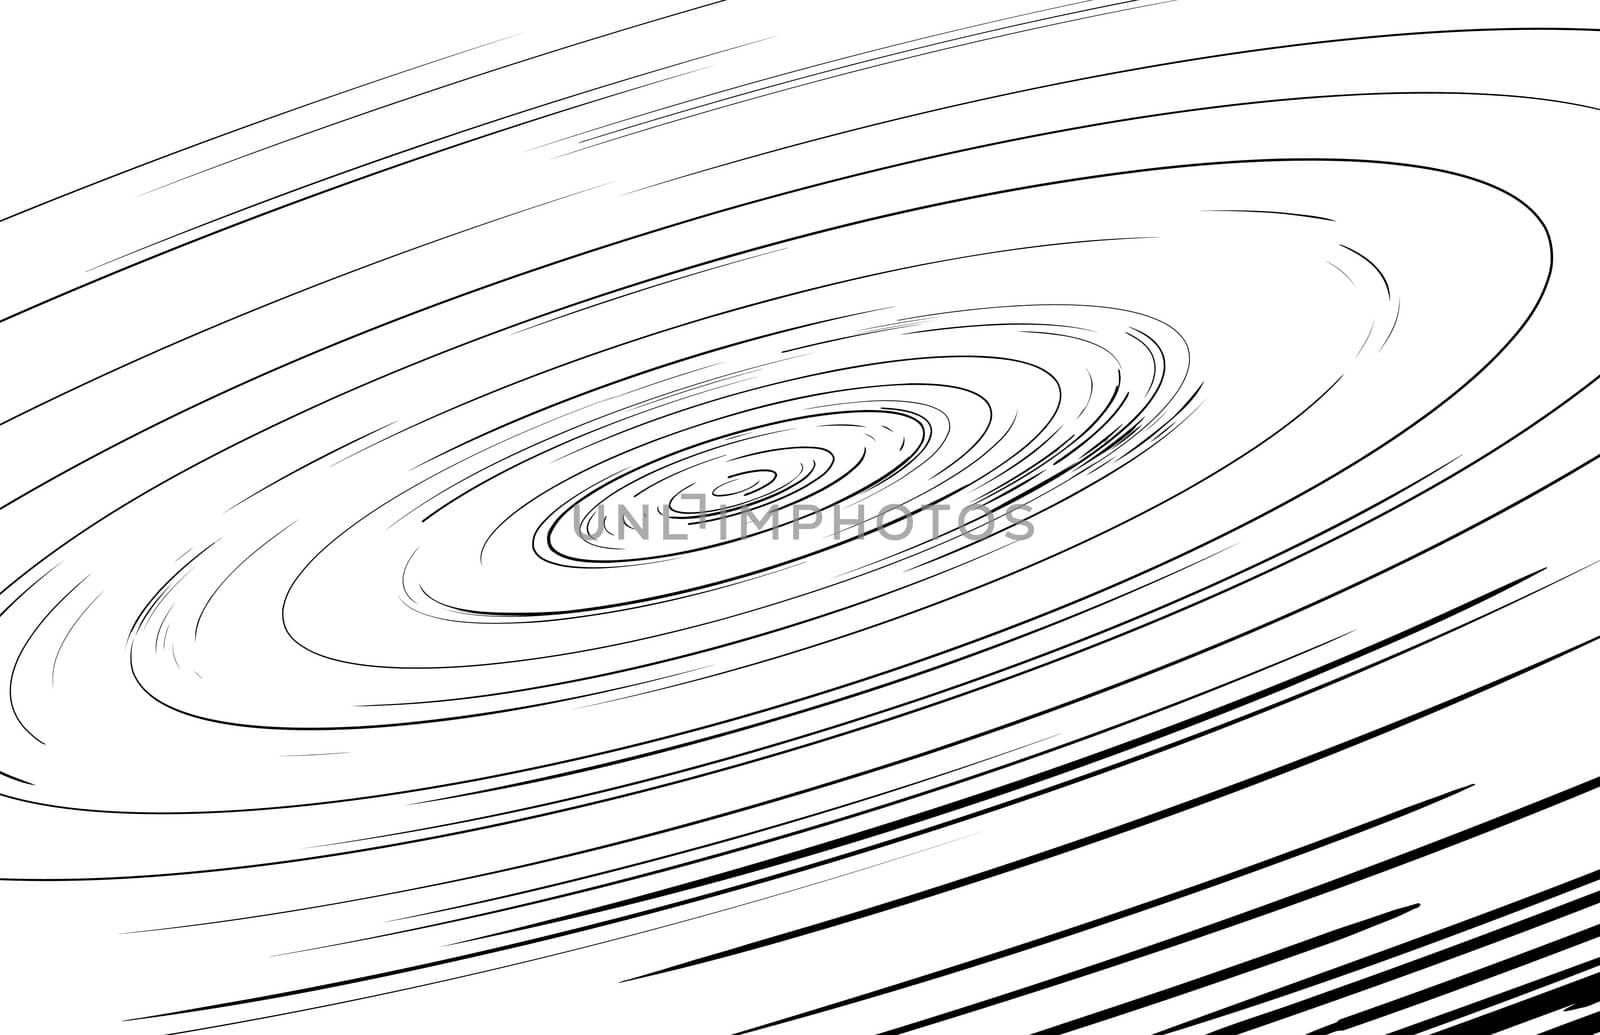 Outlined Fast Moving Whirlpool Illustration by TheBlackRhino